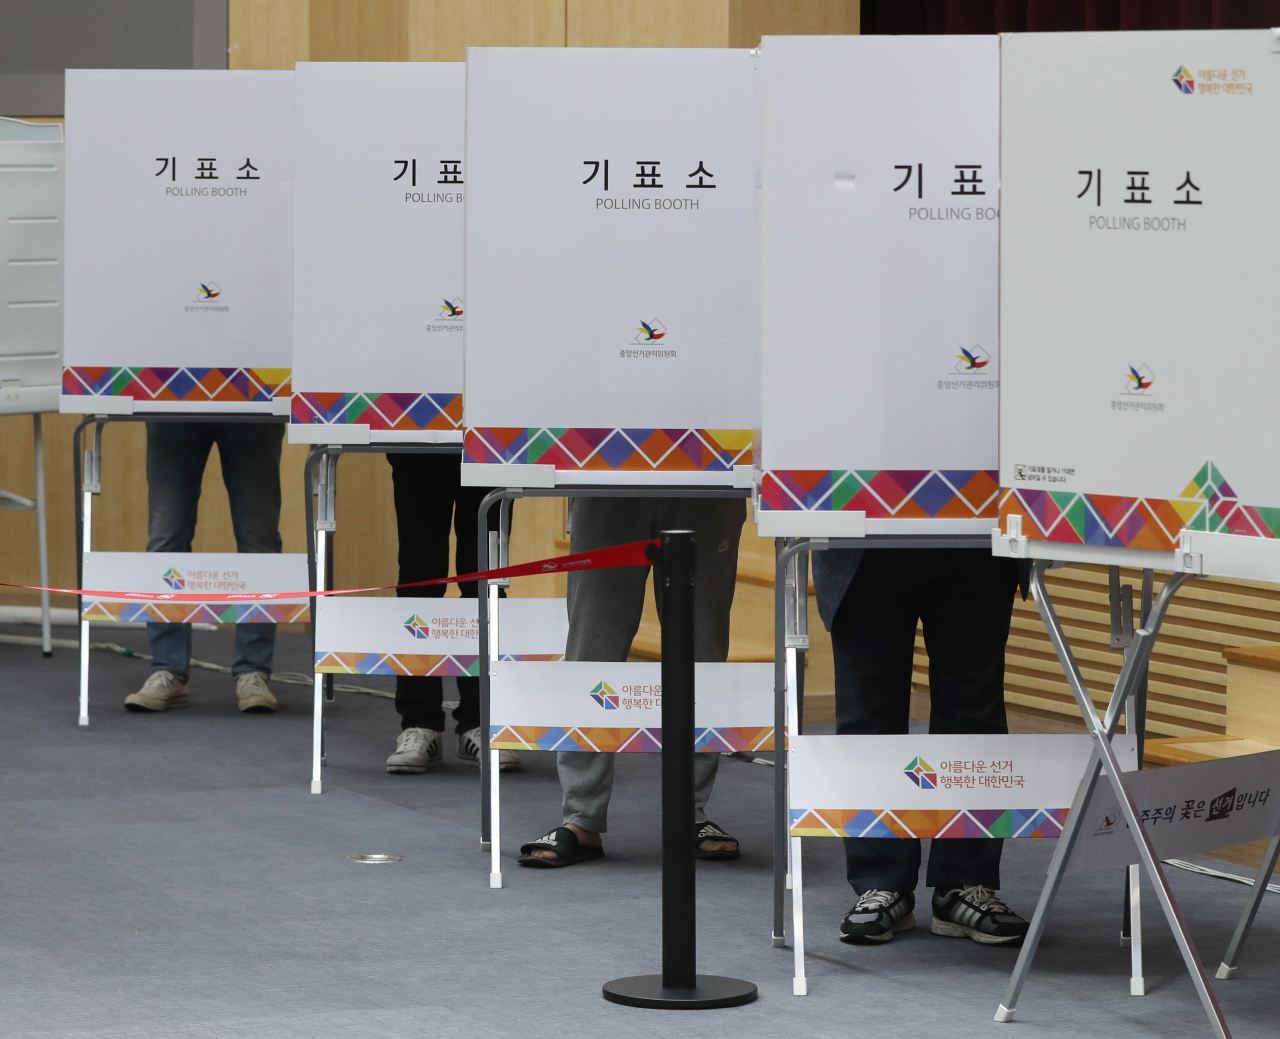 Voters mark ballots at polling booths at a voting center in Ulsan during the two-day early voting period for the local elections and parliamentary by-elections in May 2022. (Yonhap)